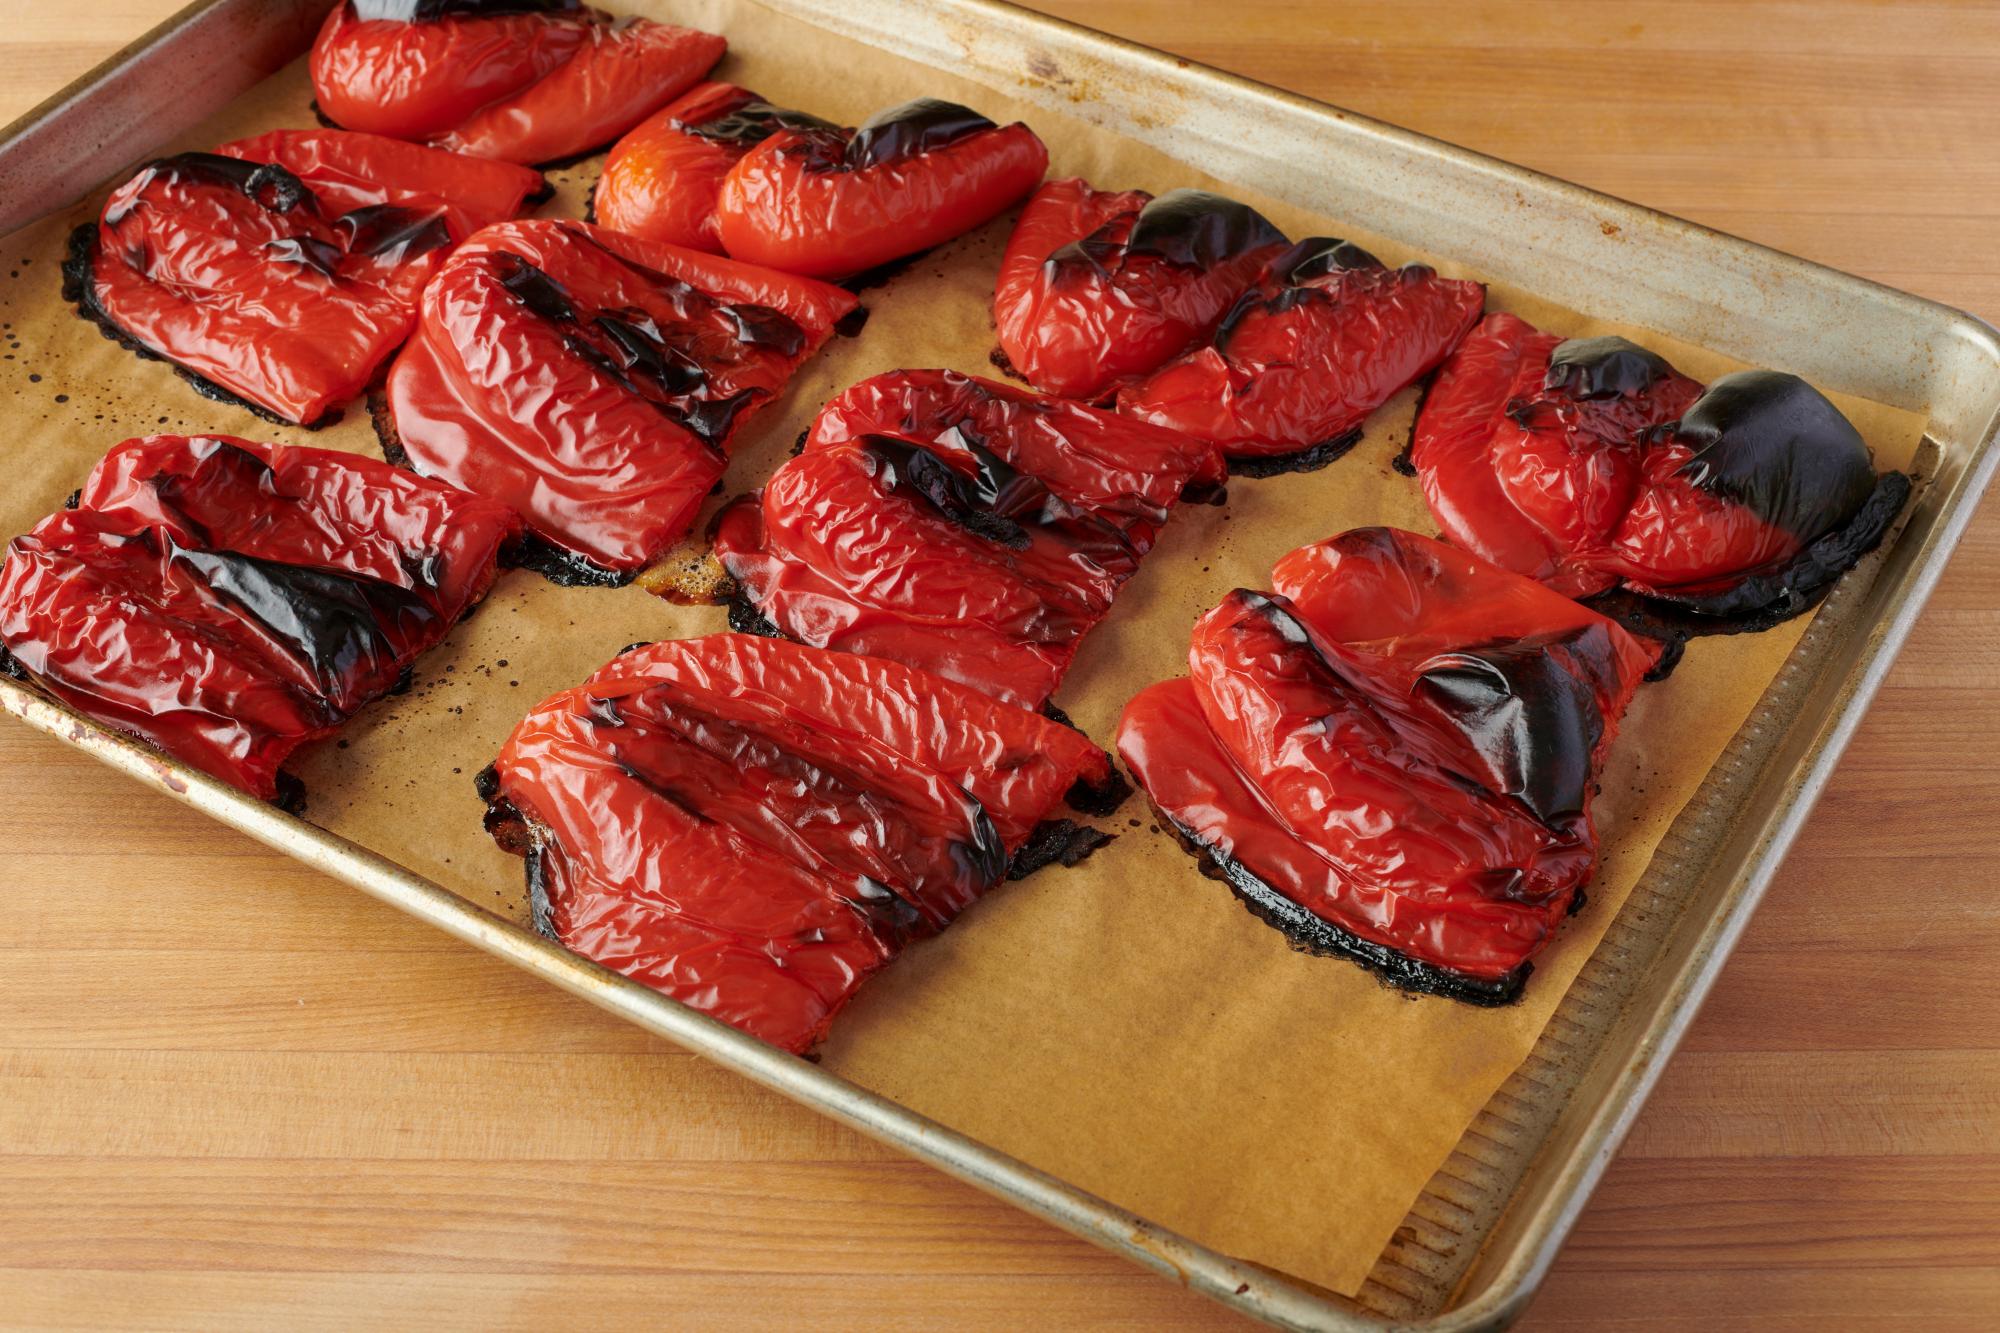 Roasted the red pepper.